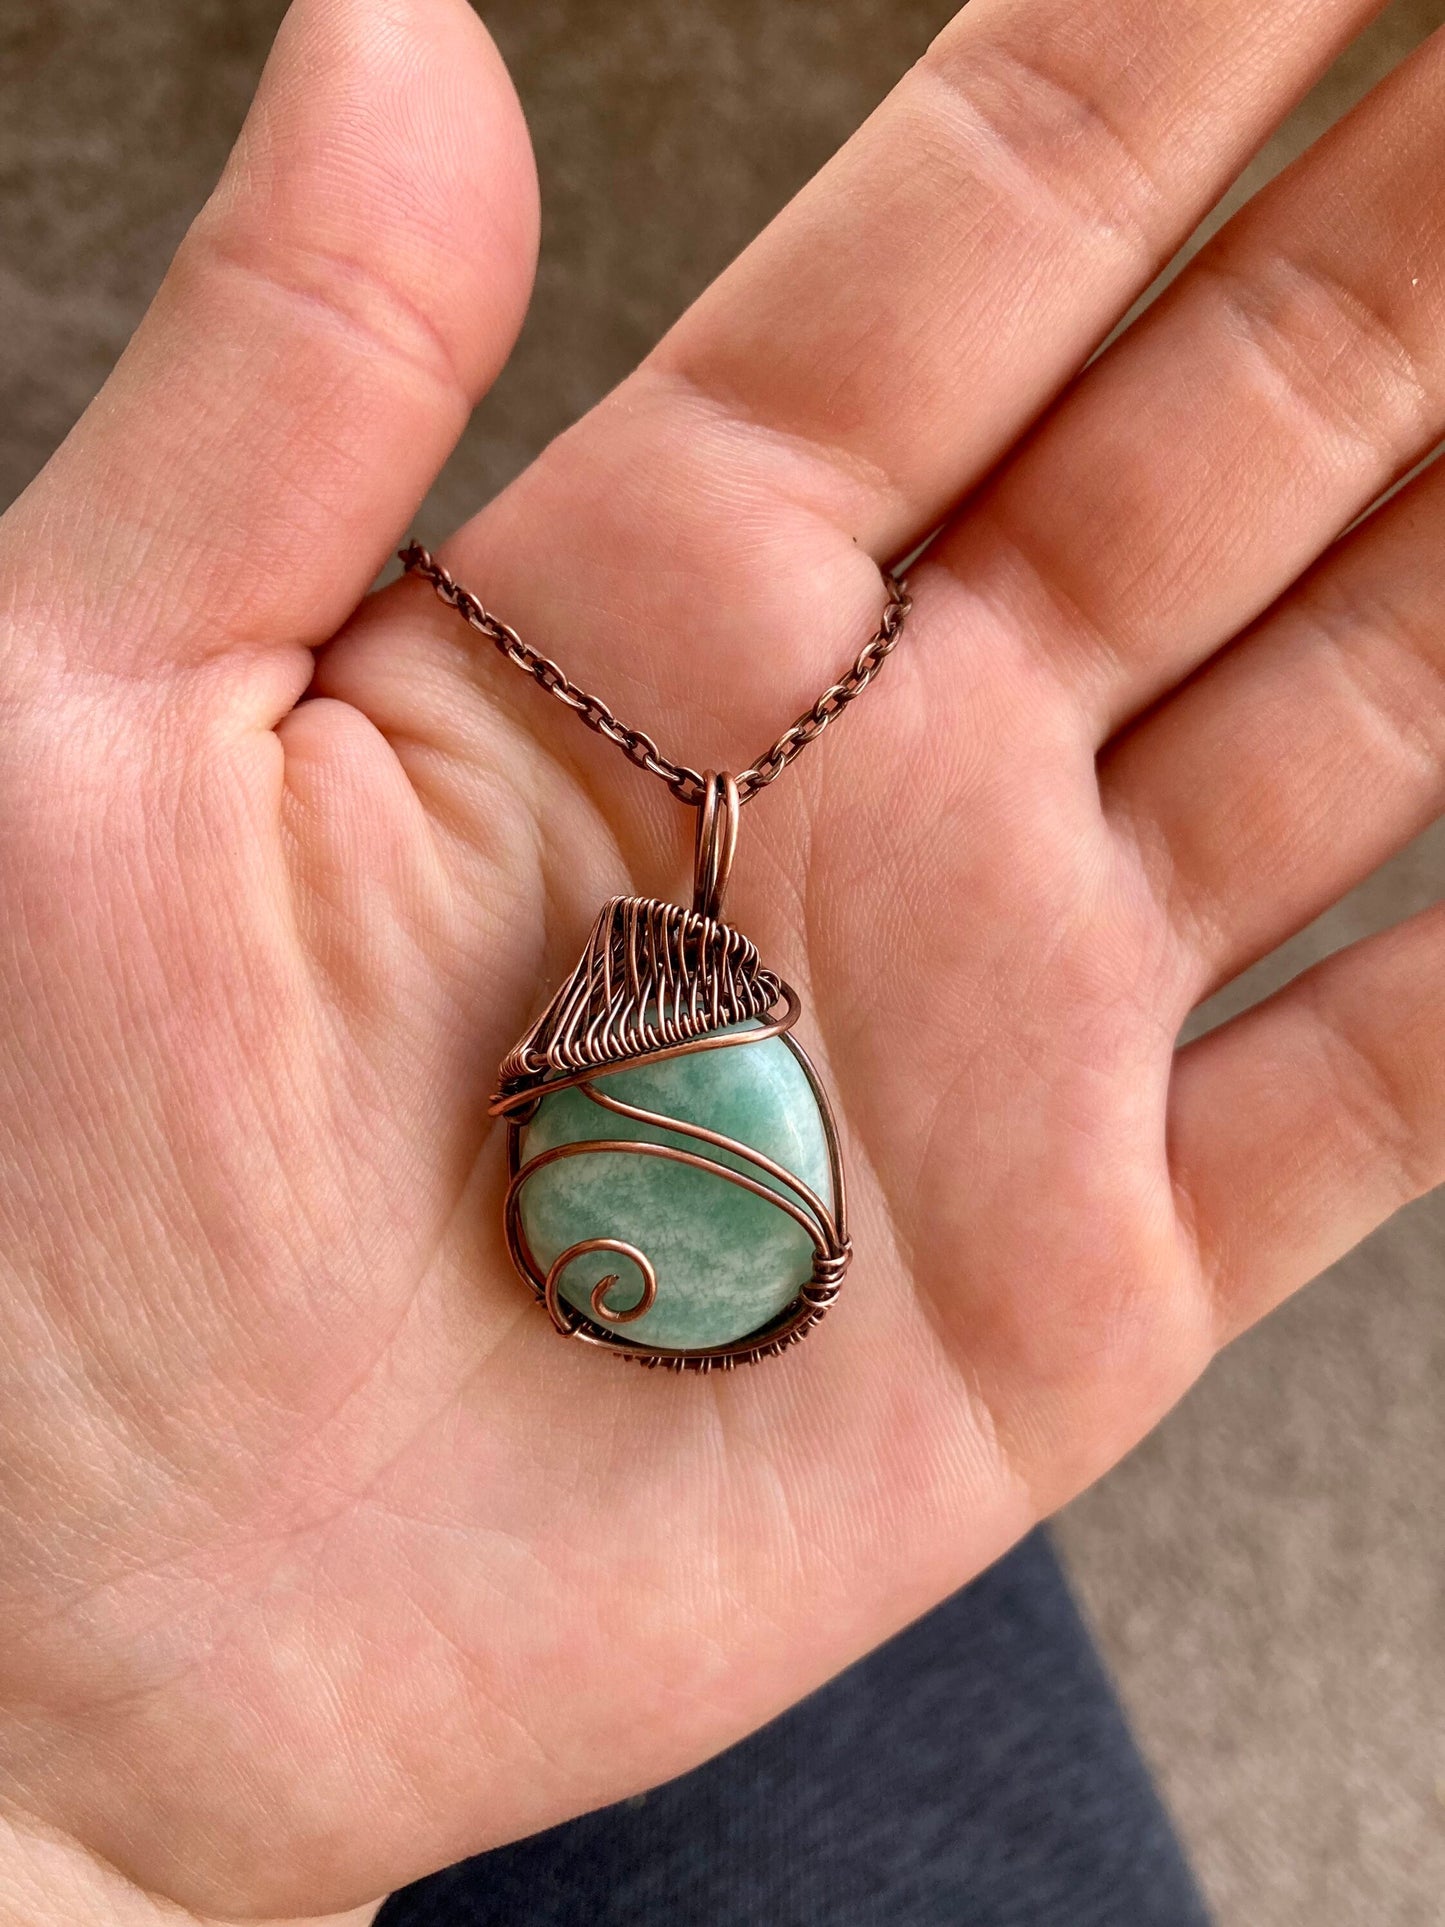 Amazonite pendant handmade necklace wire wrapped natural stone with 18 inch length chain